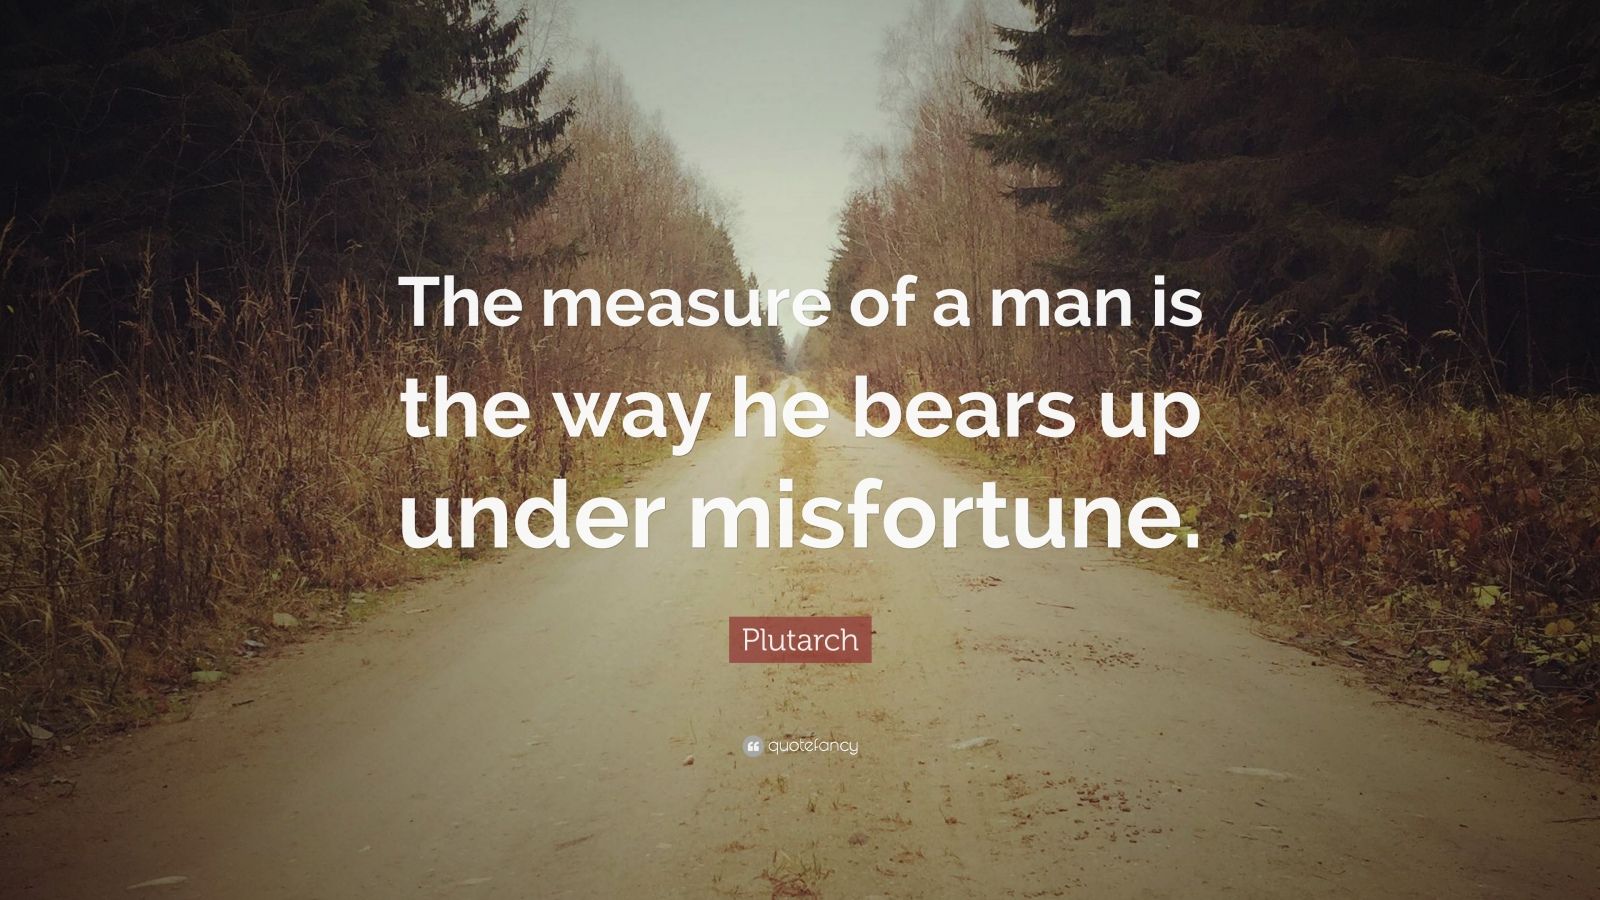 Plutarch Quote: “The measure of a man is the way he bears up under